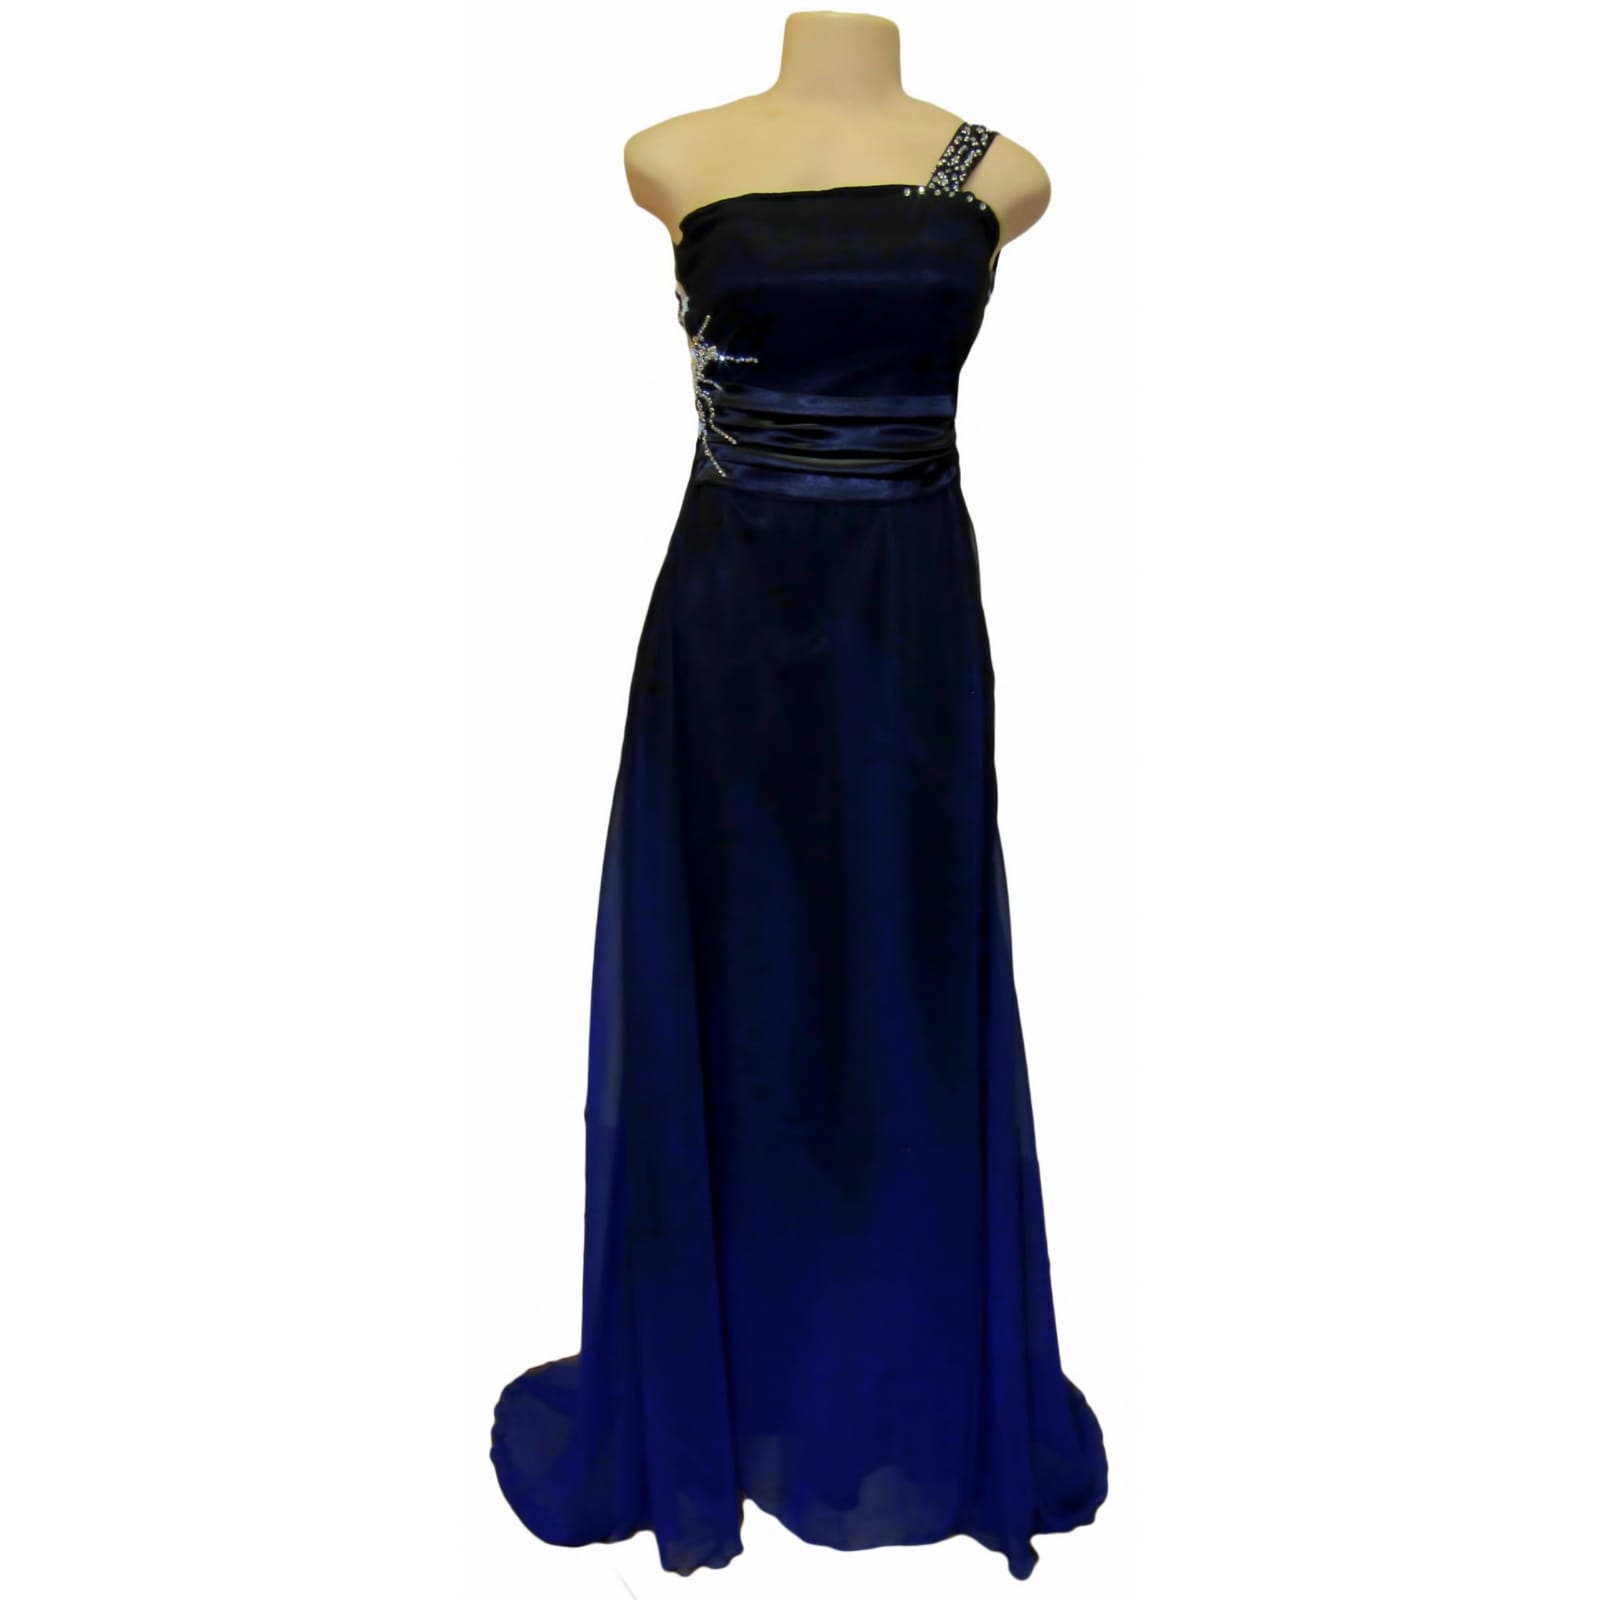 Black and royal blue flowy prom dress with a wide waist band 3 black and royal blue flowy prom dress with a wide waist band, an open back with strap design. With a train and silver detailing.